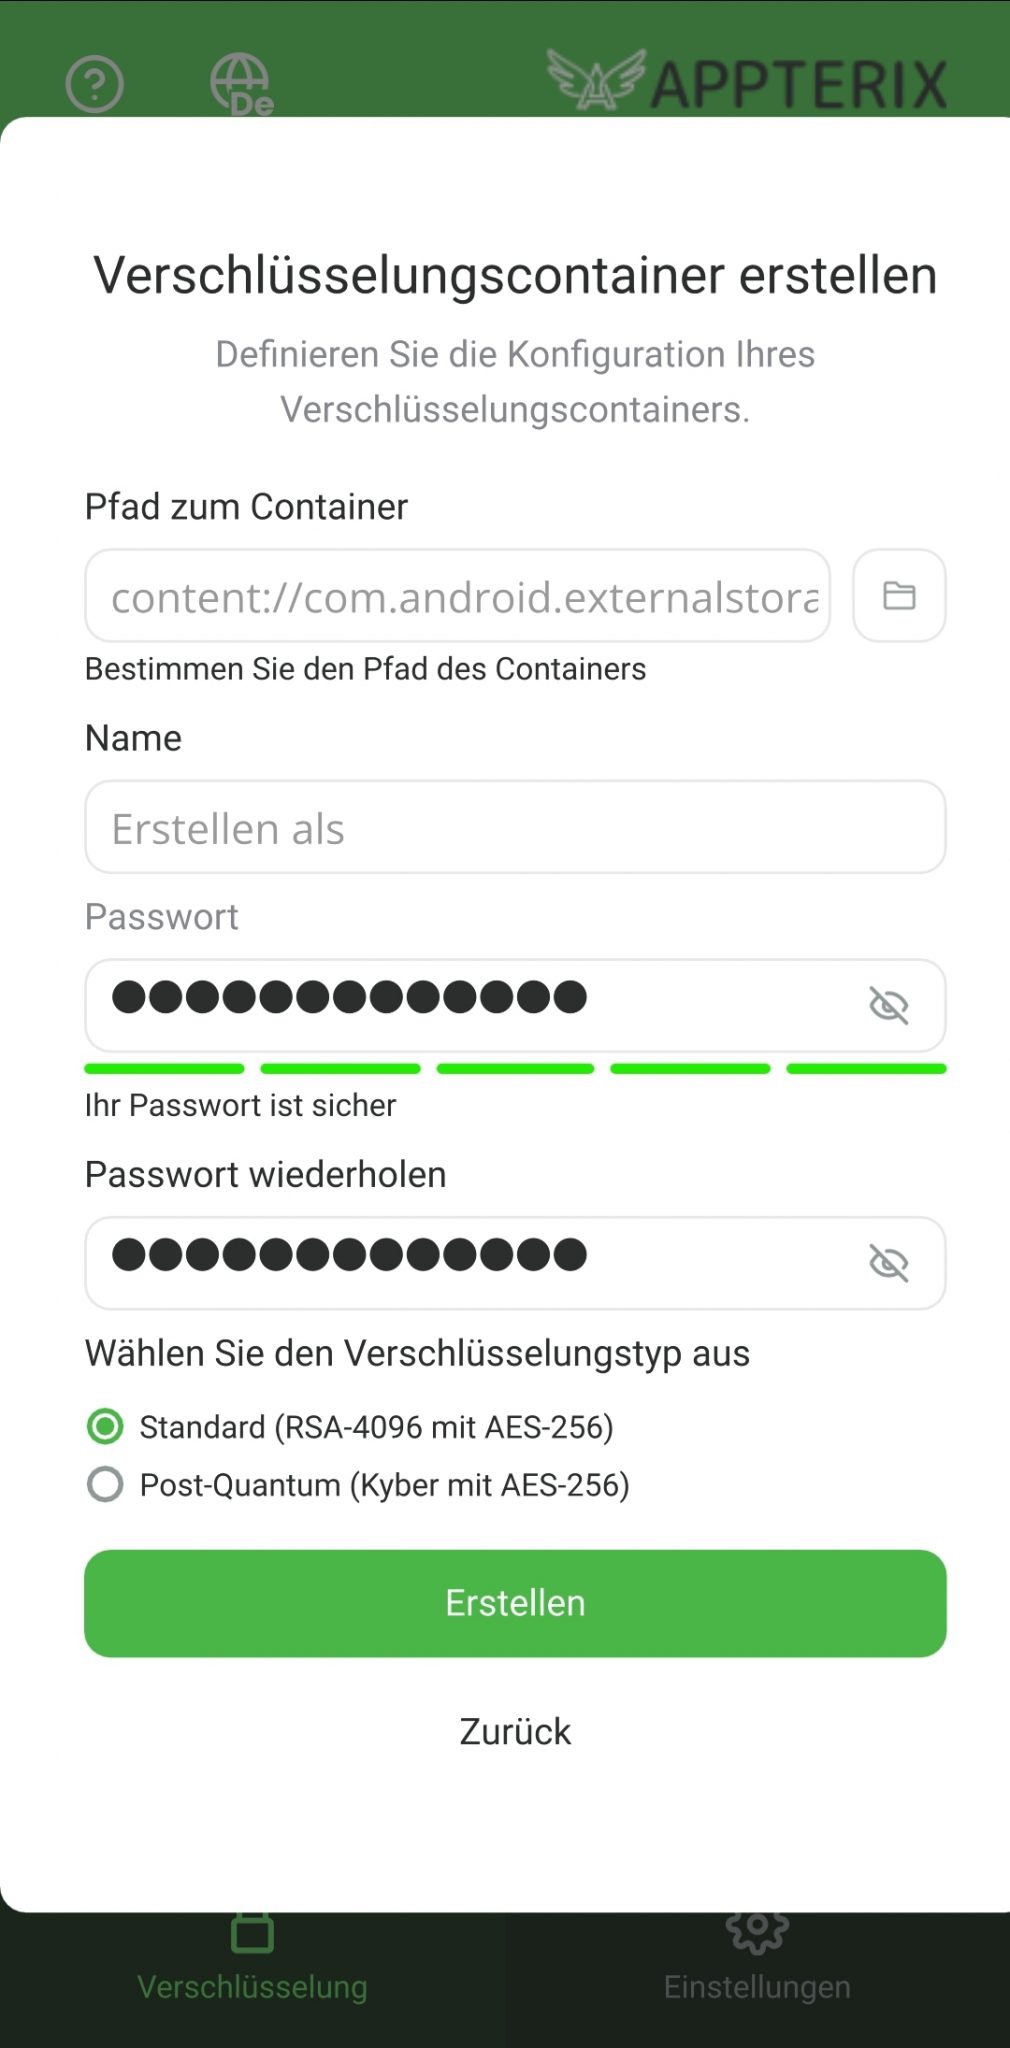 Appterix-Encryption-TechPreview-Android-EgoMind-1-1